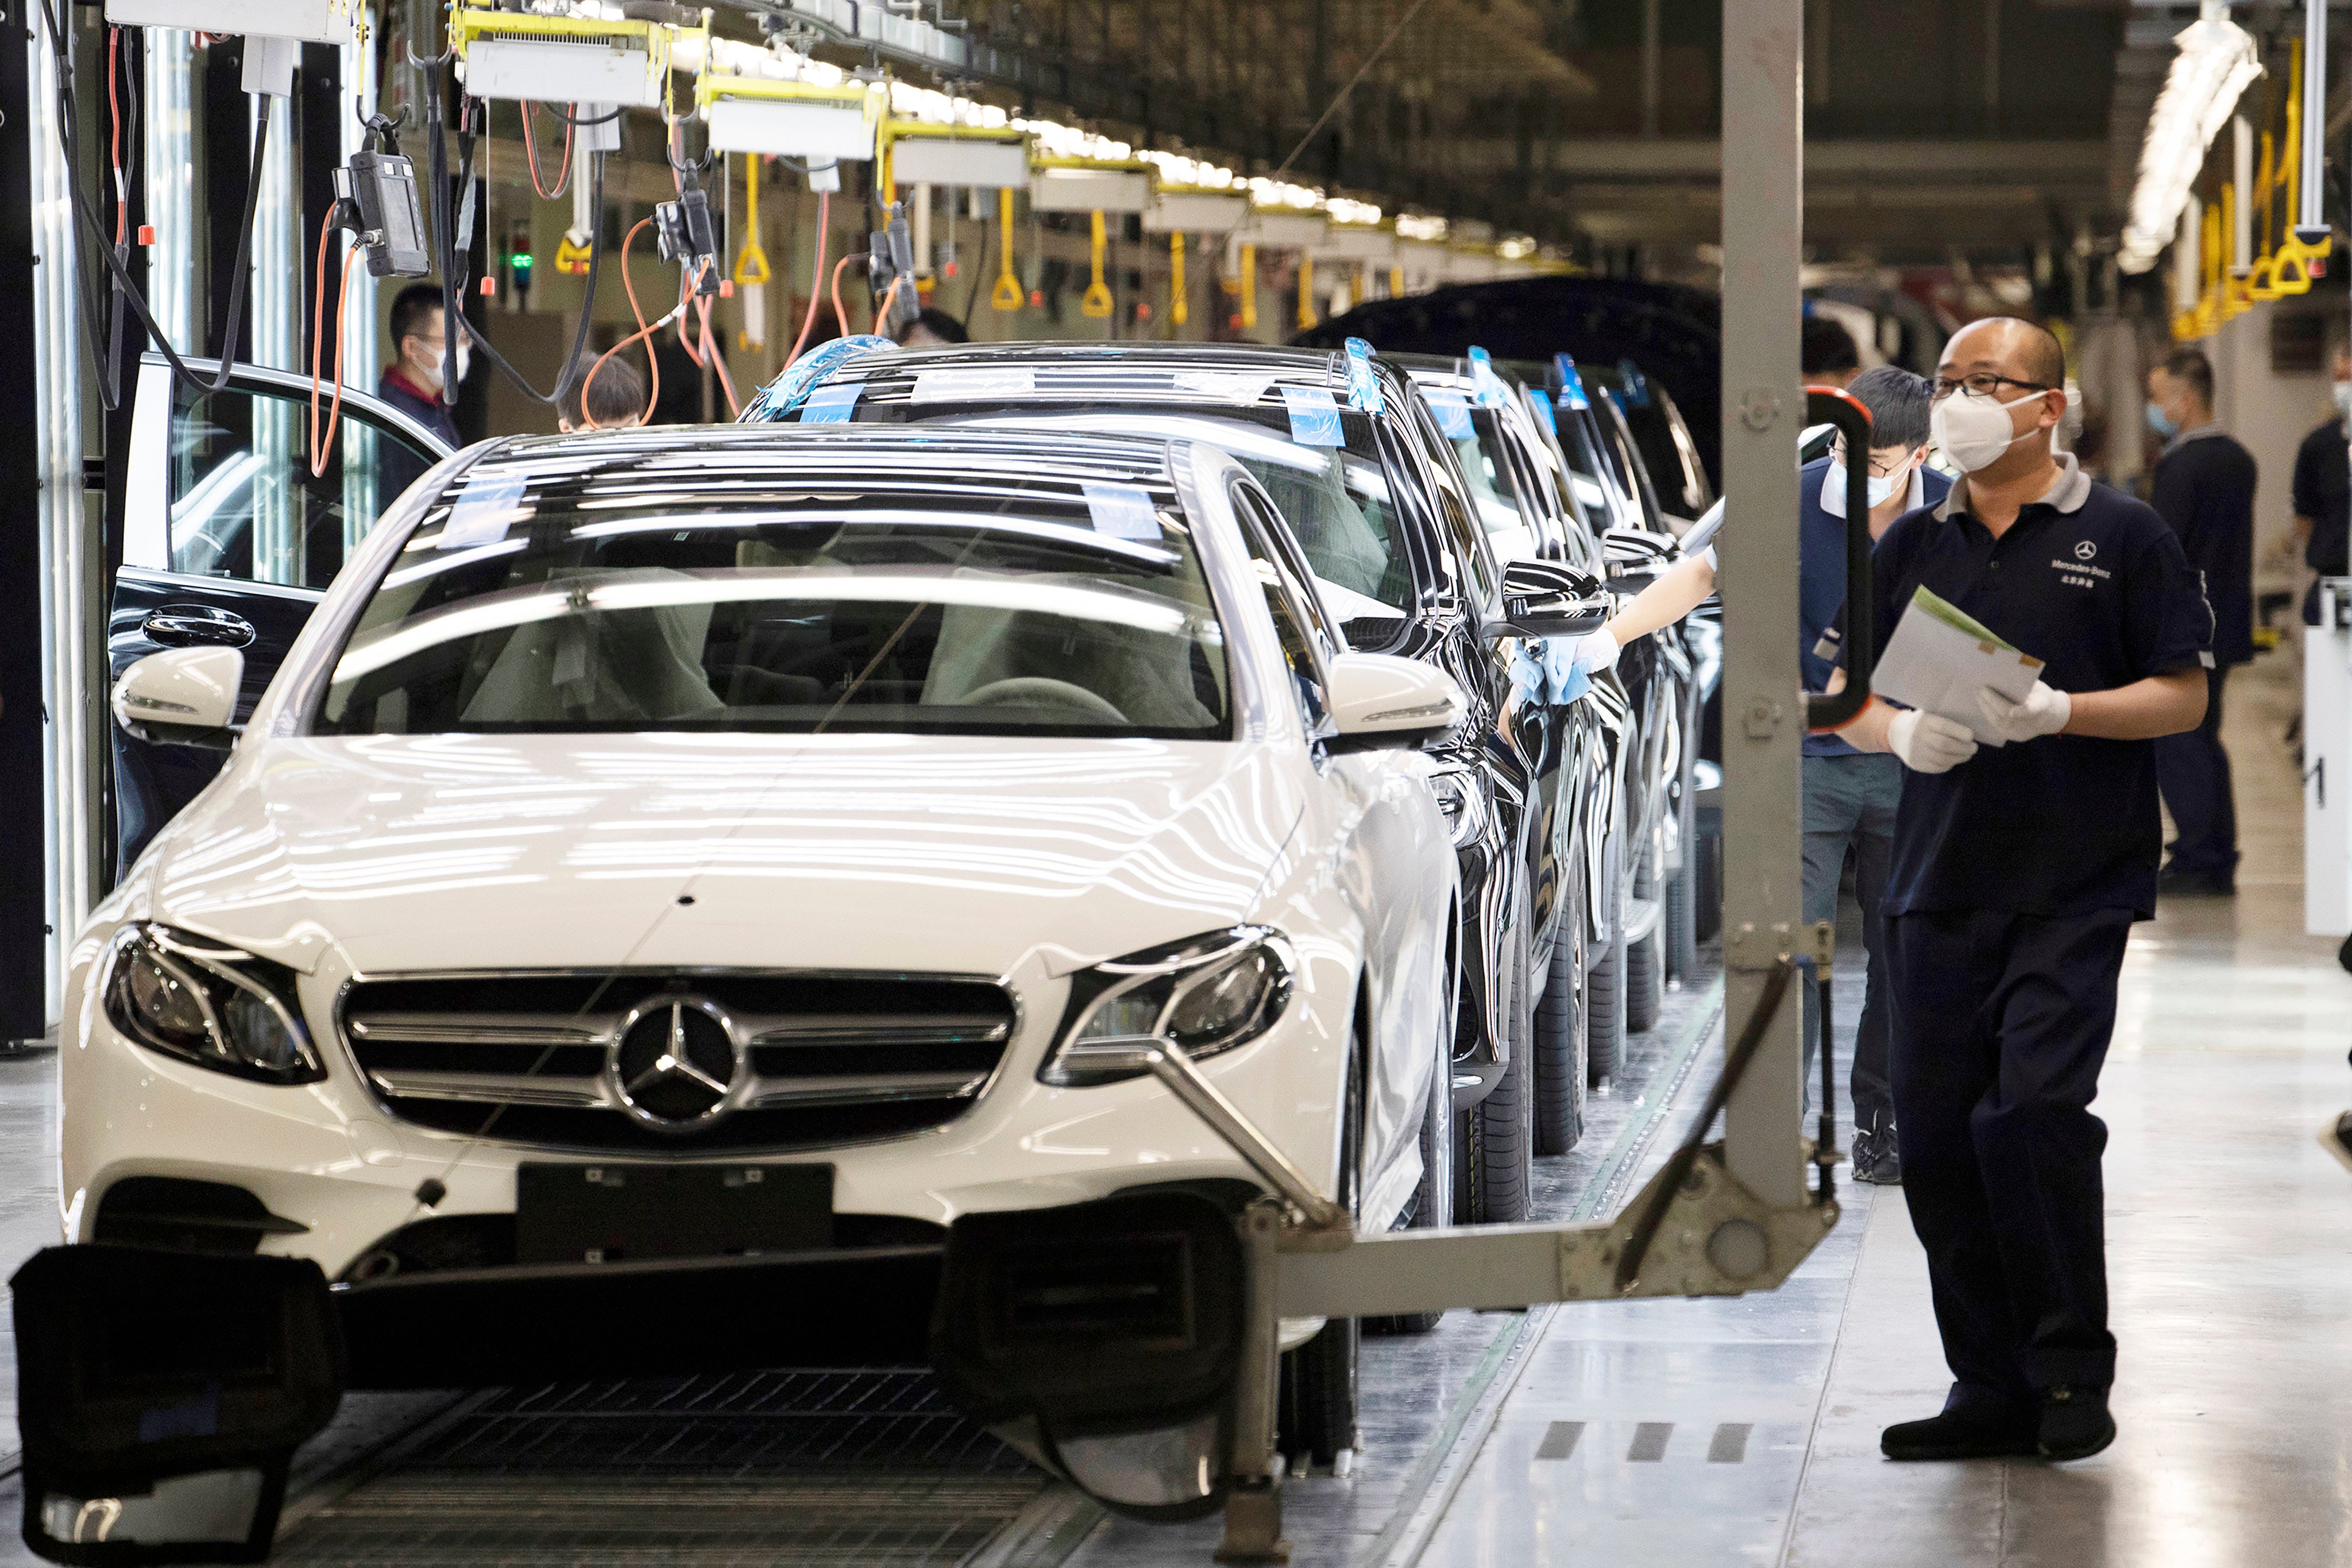 Workers inspect newly assembled cars at a Beijing Benz Automotive Co. Ltd factory, a German joint venture company for Mercedes-Benz, in Beijing, in May 2020. Photo: AP Photo